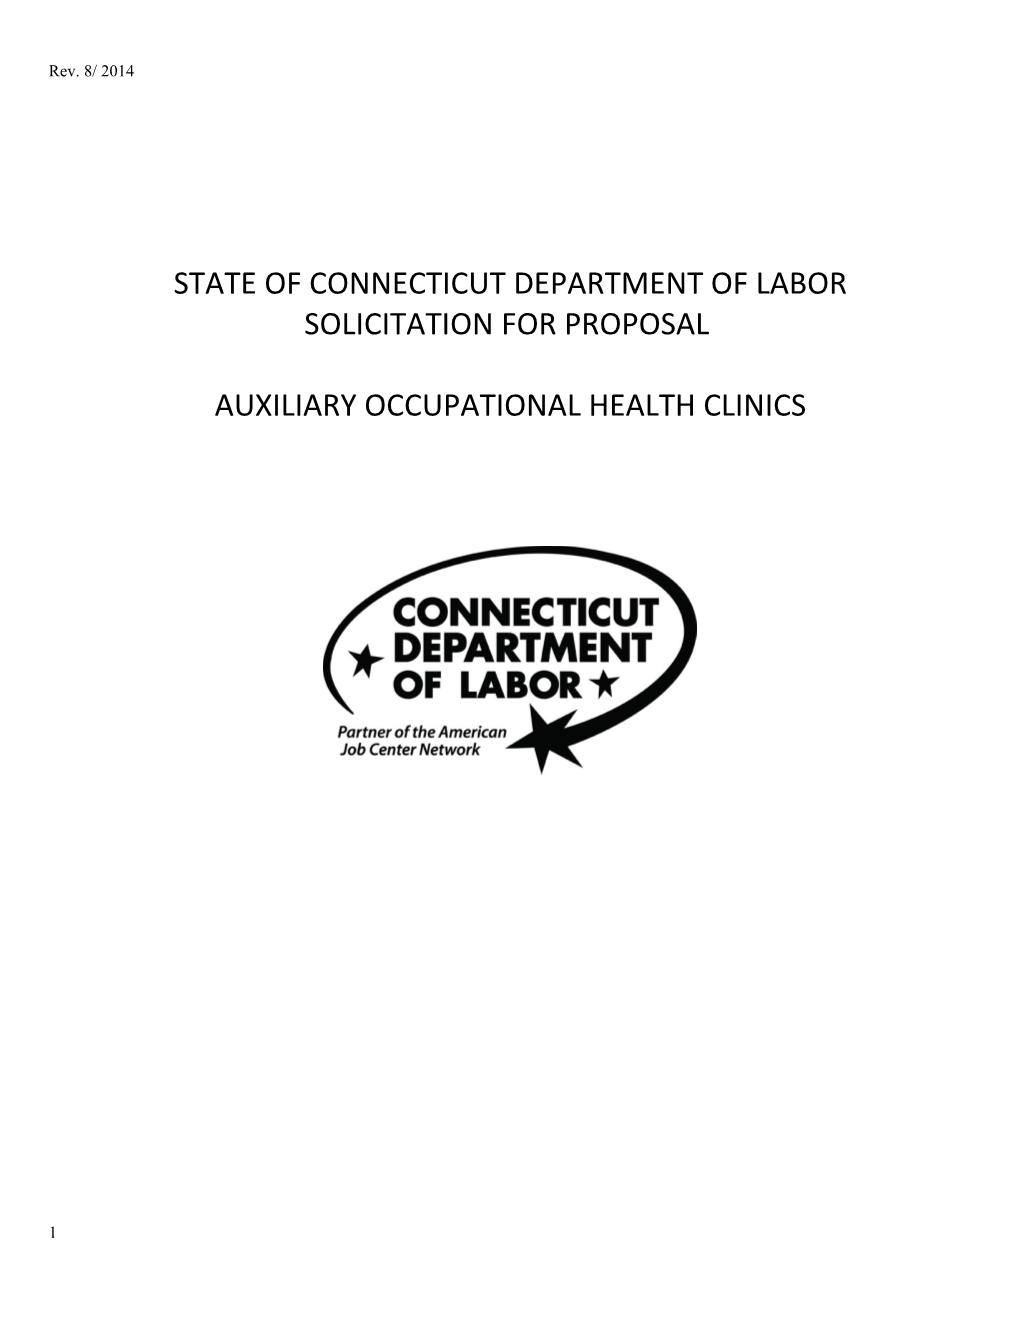 State of Connecticut Department of Labor